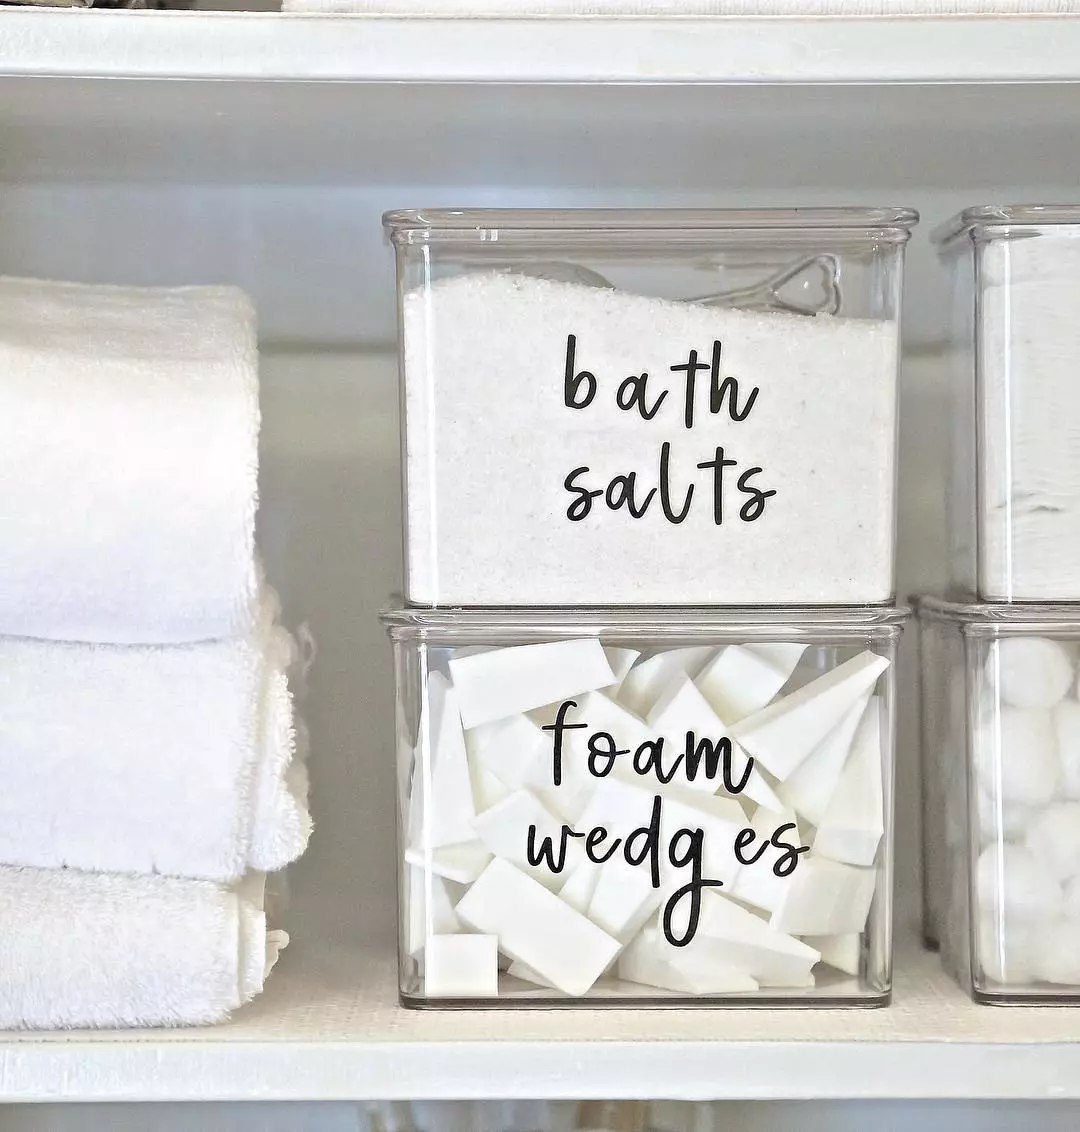 https://www.extraspace.com/blog/wp-content/uploads/2018/02/bathroom-organization-give-clear-containers-a-try.jpg.webp